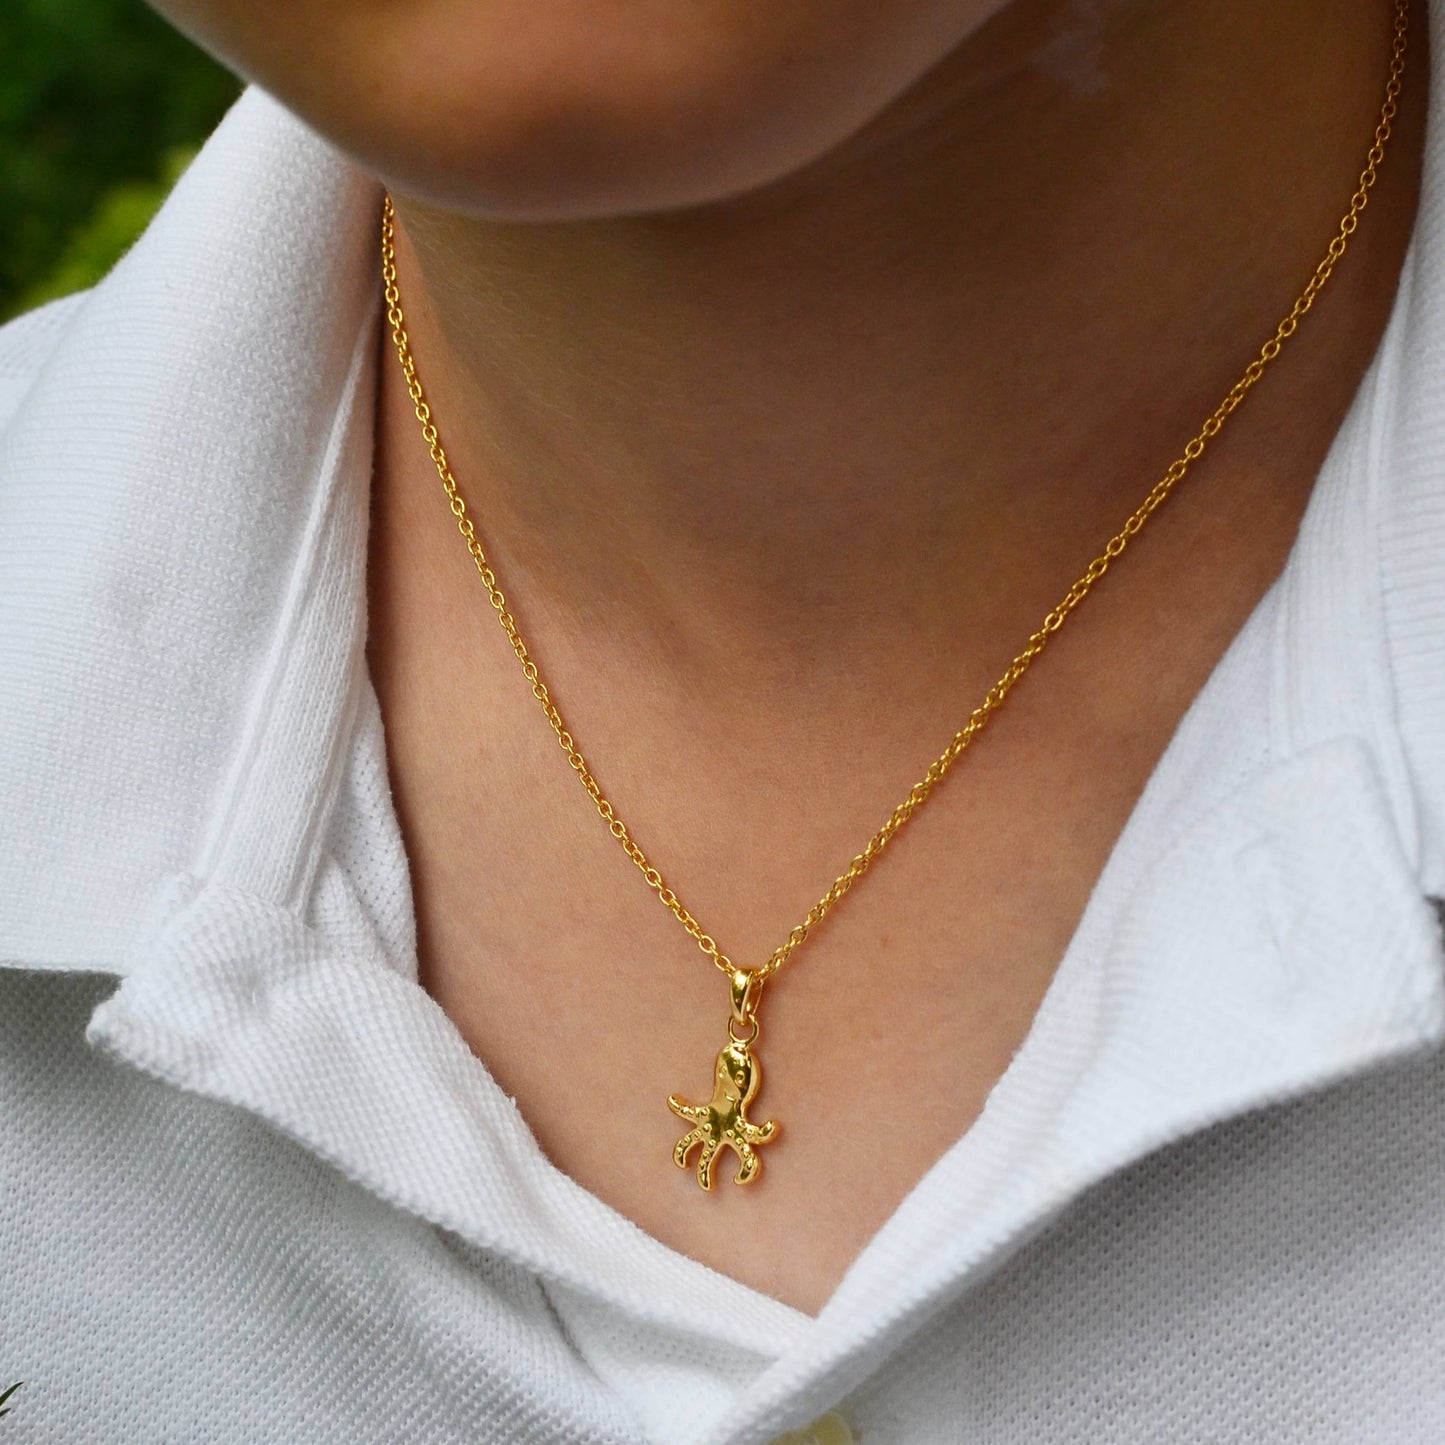 Boy wearing Gold Octopus Pendant on an Extendable Chain Necklace